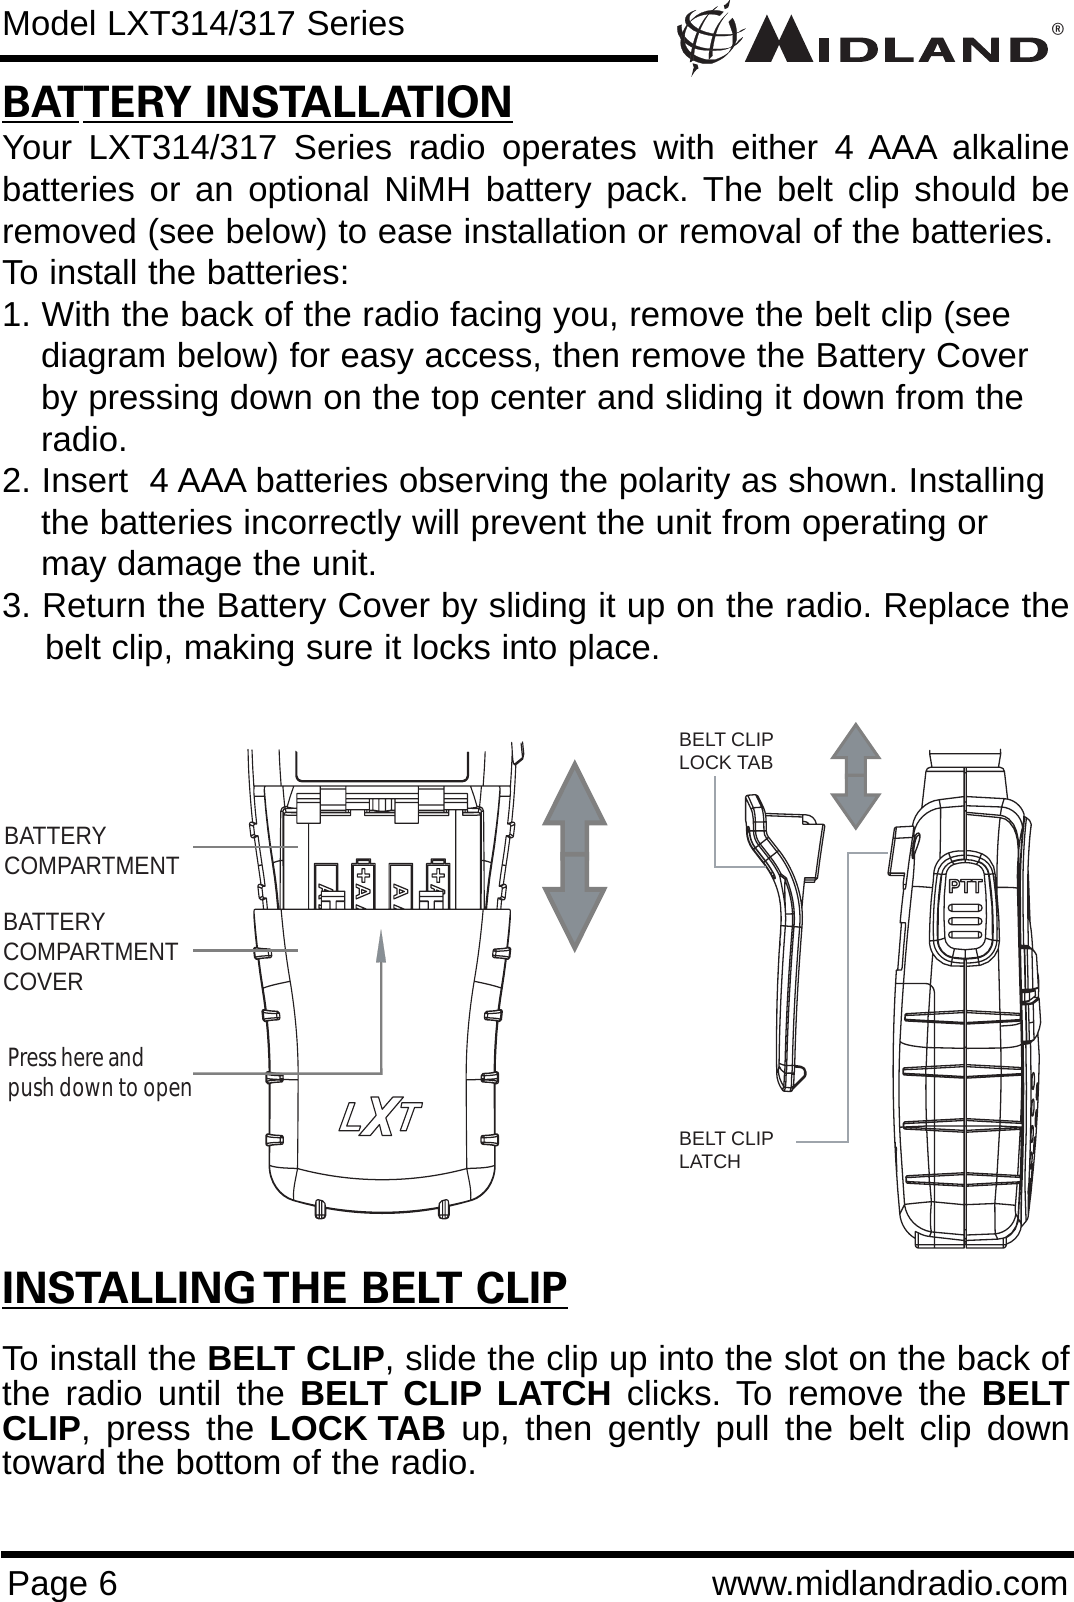 ®Page 6 www.midlandradio.comBATTERY INSTALLATIONYour LXT314/317 Series radio operates with either 4 AAA alkalinebatteries or an optional NiMH battery pack. The belt clip should beremoved (see below) to ease installation or removal of the batteries. To install the batteries:1. With the back of the radio facing you, remove the belt clip (see diagram below) for easy access, then remove the Battery Cover by pressing down on the top center and sliding it down from the radio.2. Insert  4 AAA batteries observing the polarity as shown. Installing the batteries incorrectly will prevent the unit from operating or may damage the unit.3. Return the Battery Cover by sliding it up on the radio. Replace thebelt clip, making sure it locks into place.BATTERYCOMPARTMENTBATTERYCOMPARTMENTCOVERPress here and push down to openModel LXT314/317 SeriesINSTALLING THE BELT CLIPTo install the BELT CLIP, slide the clip up into the slot on the back ofthe radio until the BELT CLIP LATCH clicks. To remove the BELTCLIP, press the LOCK TAB up, then gently pull the belt clip downtoward the bottom of the radio.BELT CLIPLOCK TABBELT CLIP LATCH